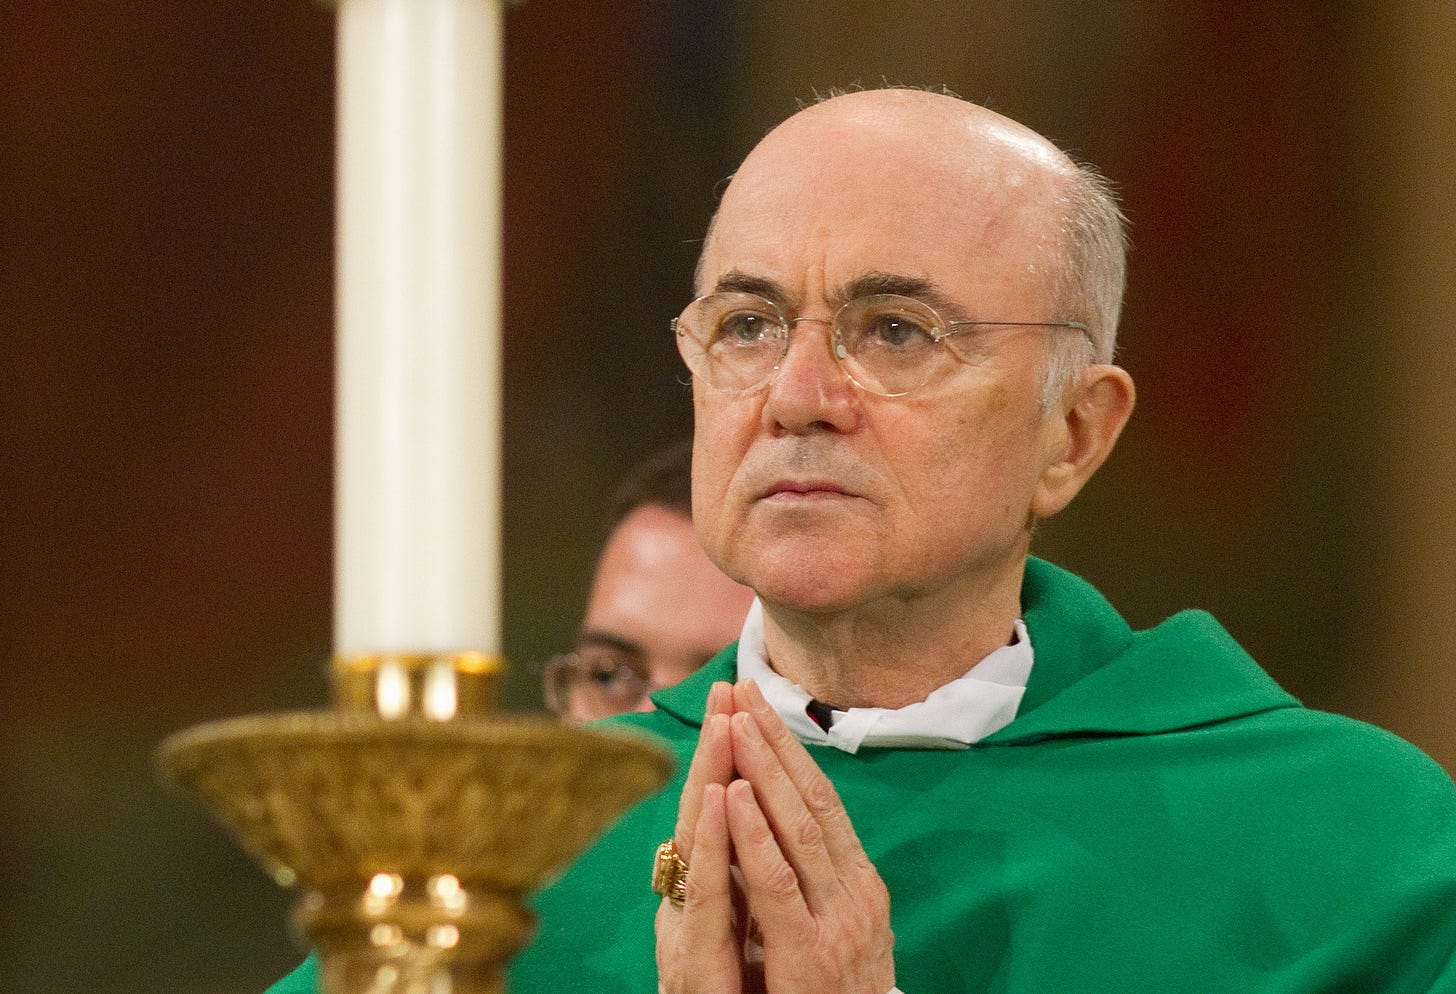 Podcast: Why is the Vatican silent on Archbishop Viganò? | America Magazine